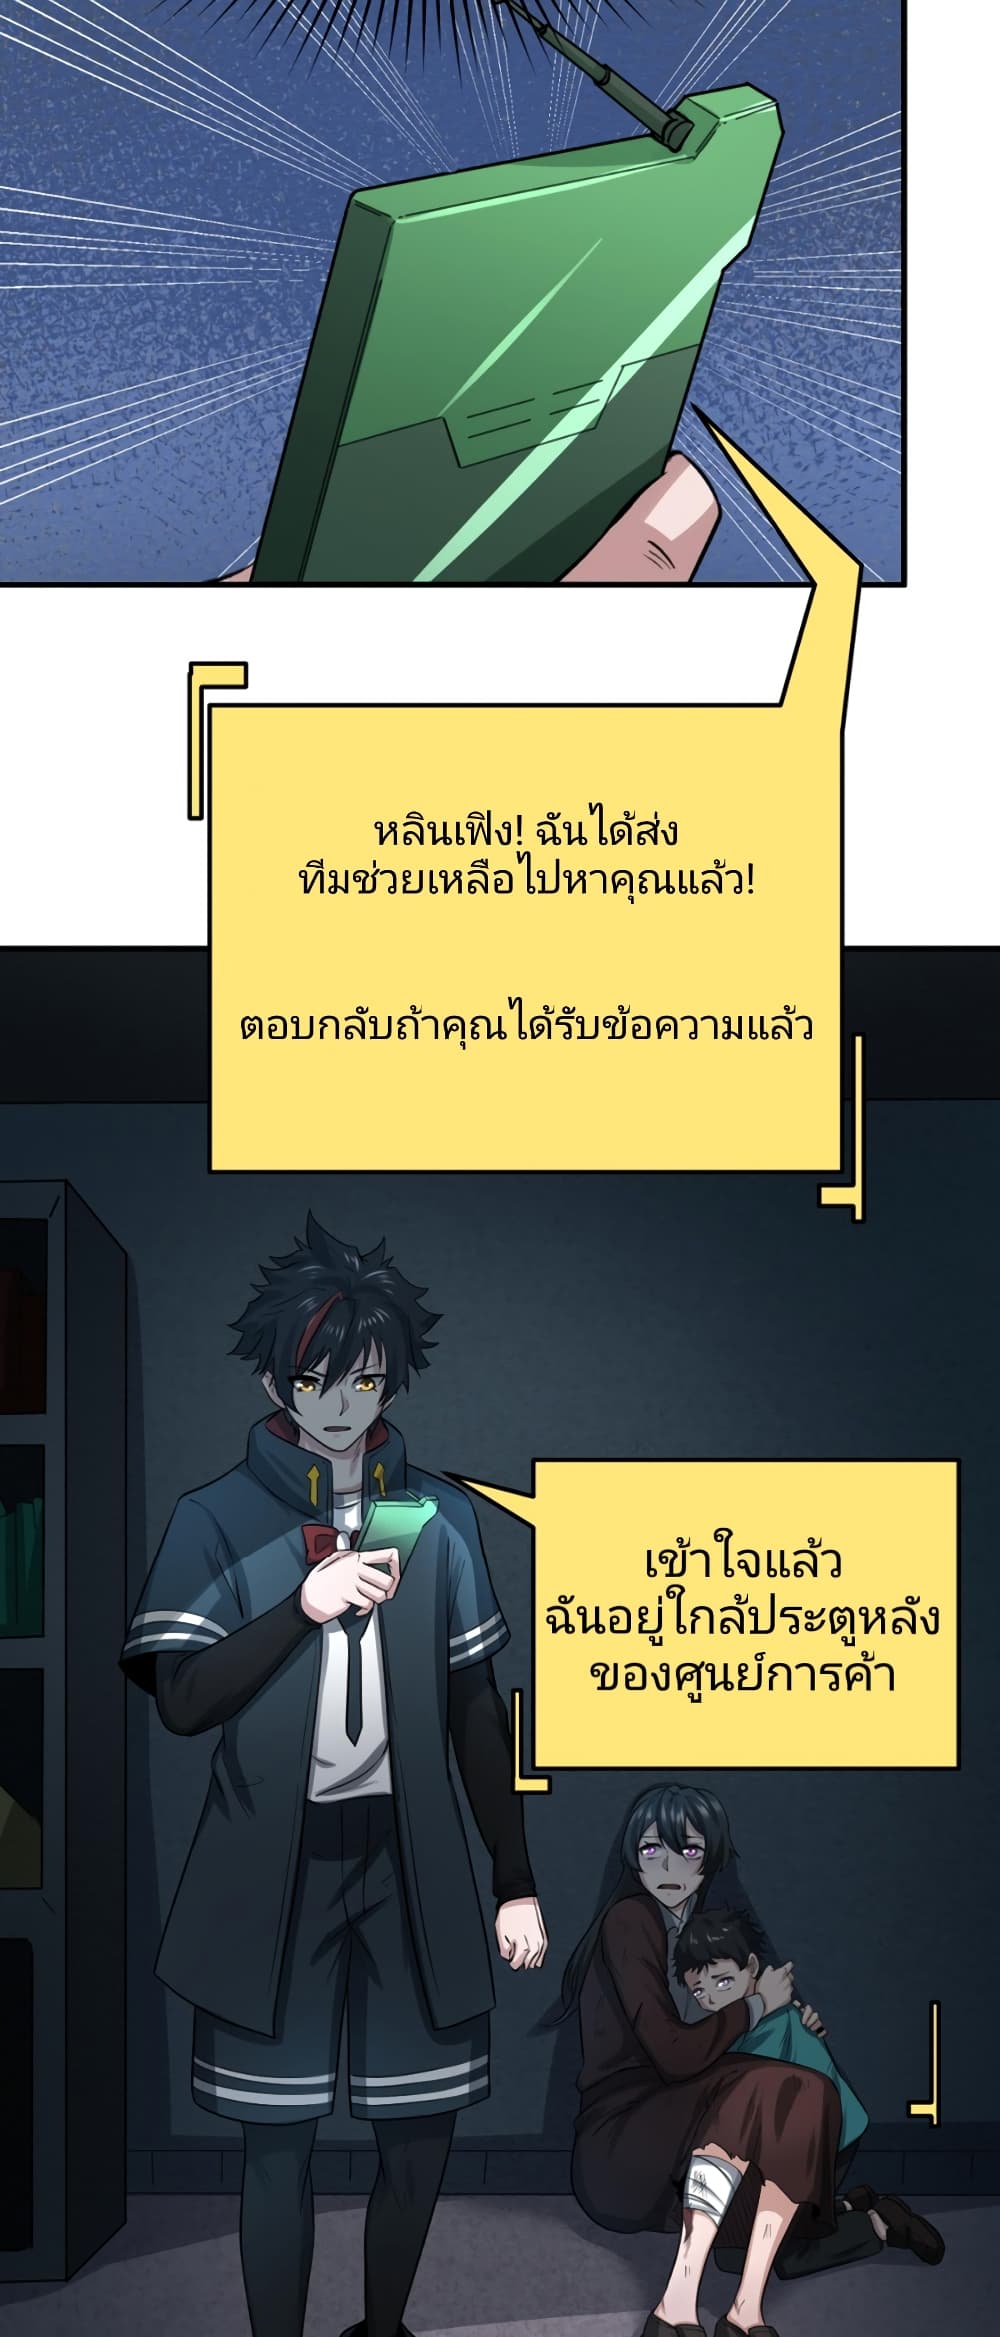 The Age of Ghost Spirits à¸à¸­à¸à¸à¸µà¹ 33 (29)